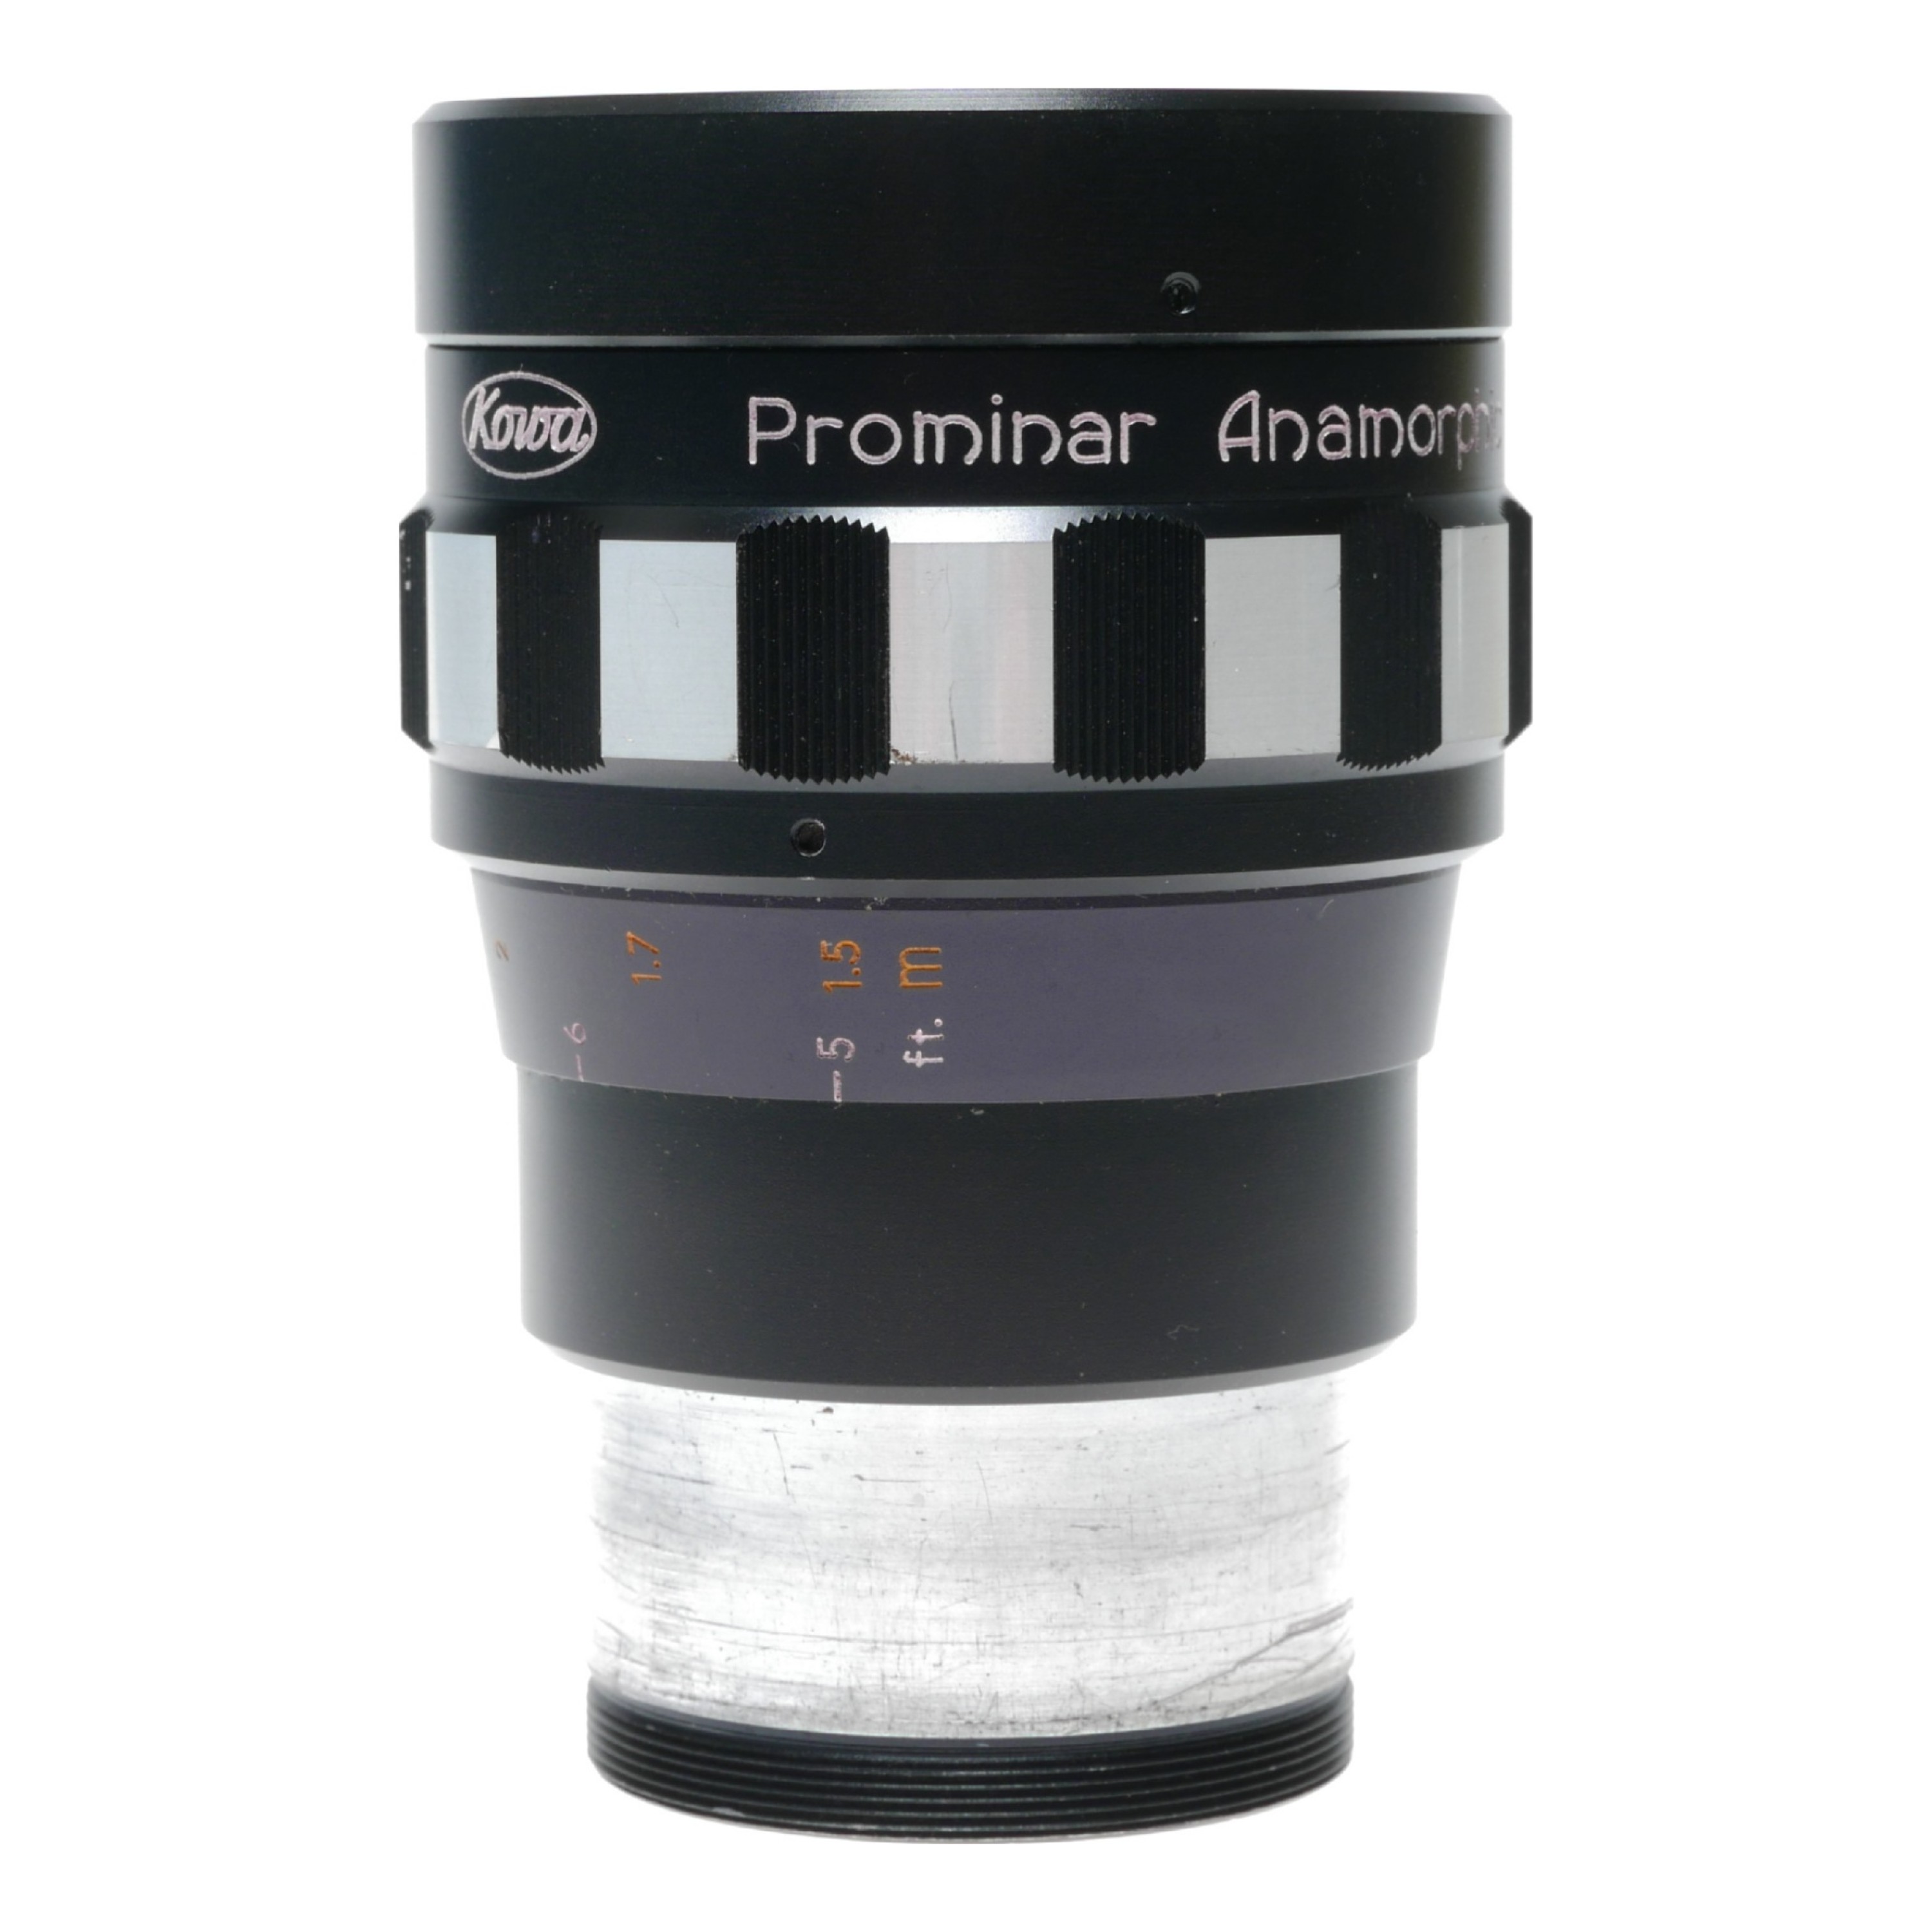 KOWA Prominar Anamorphic 16-D vintage projection lens with caps